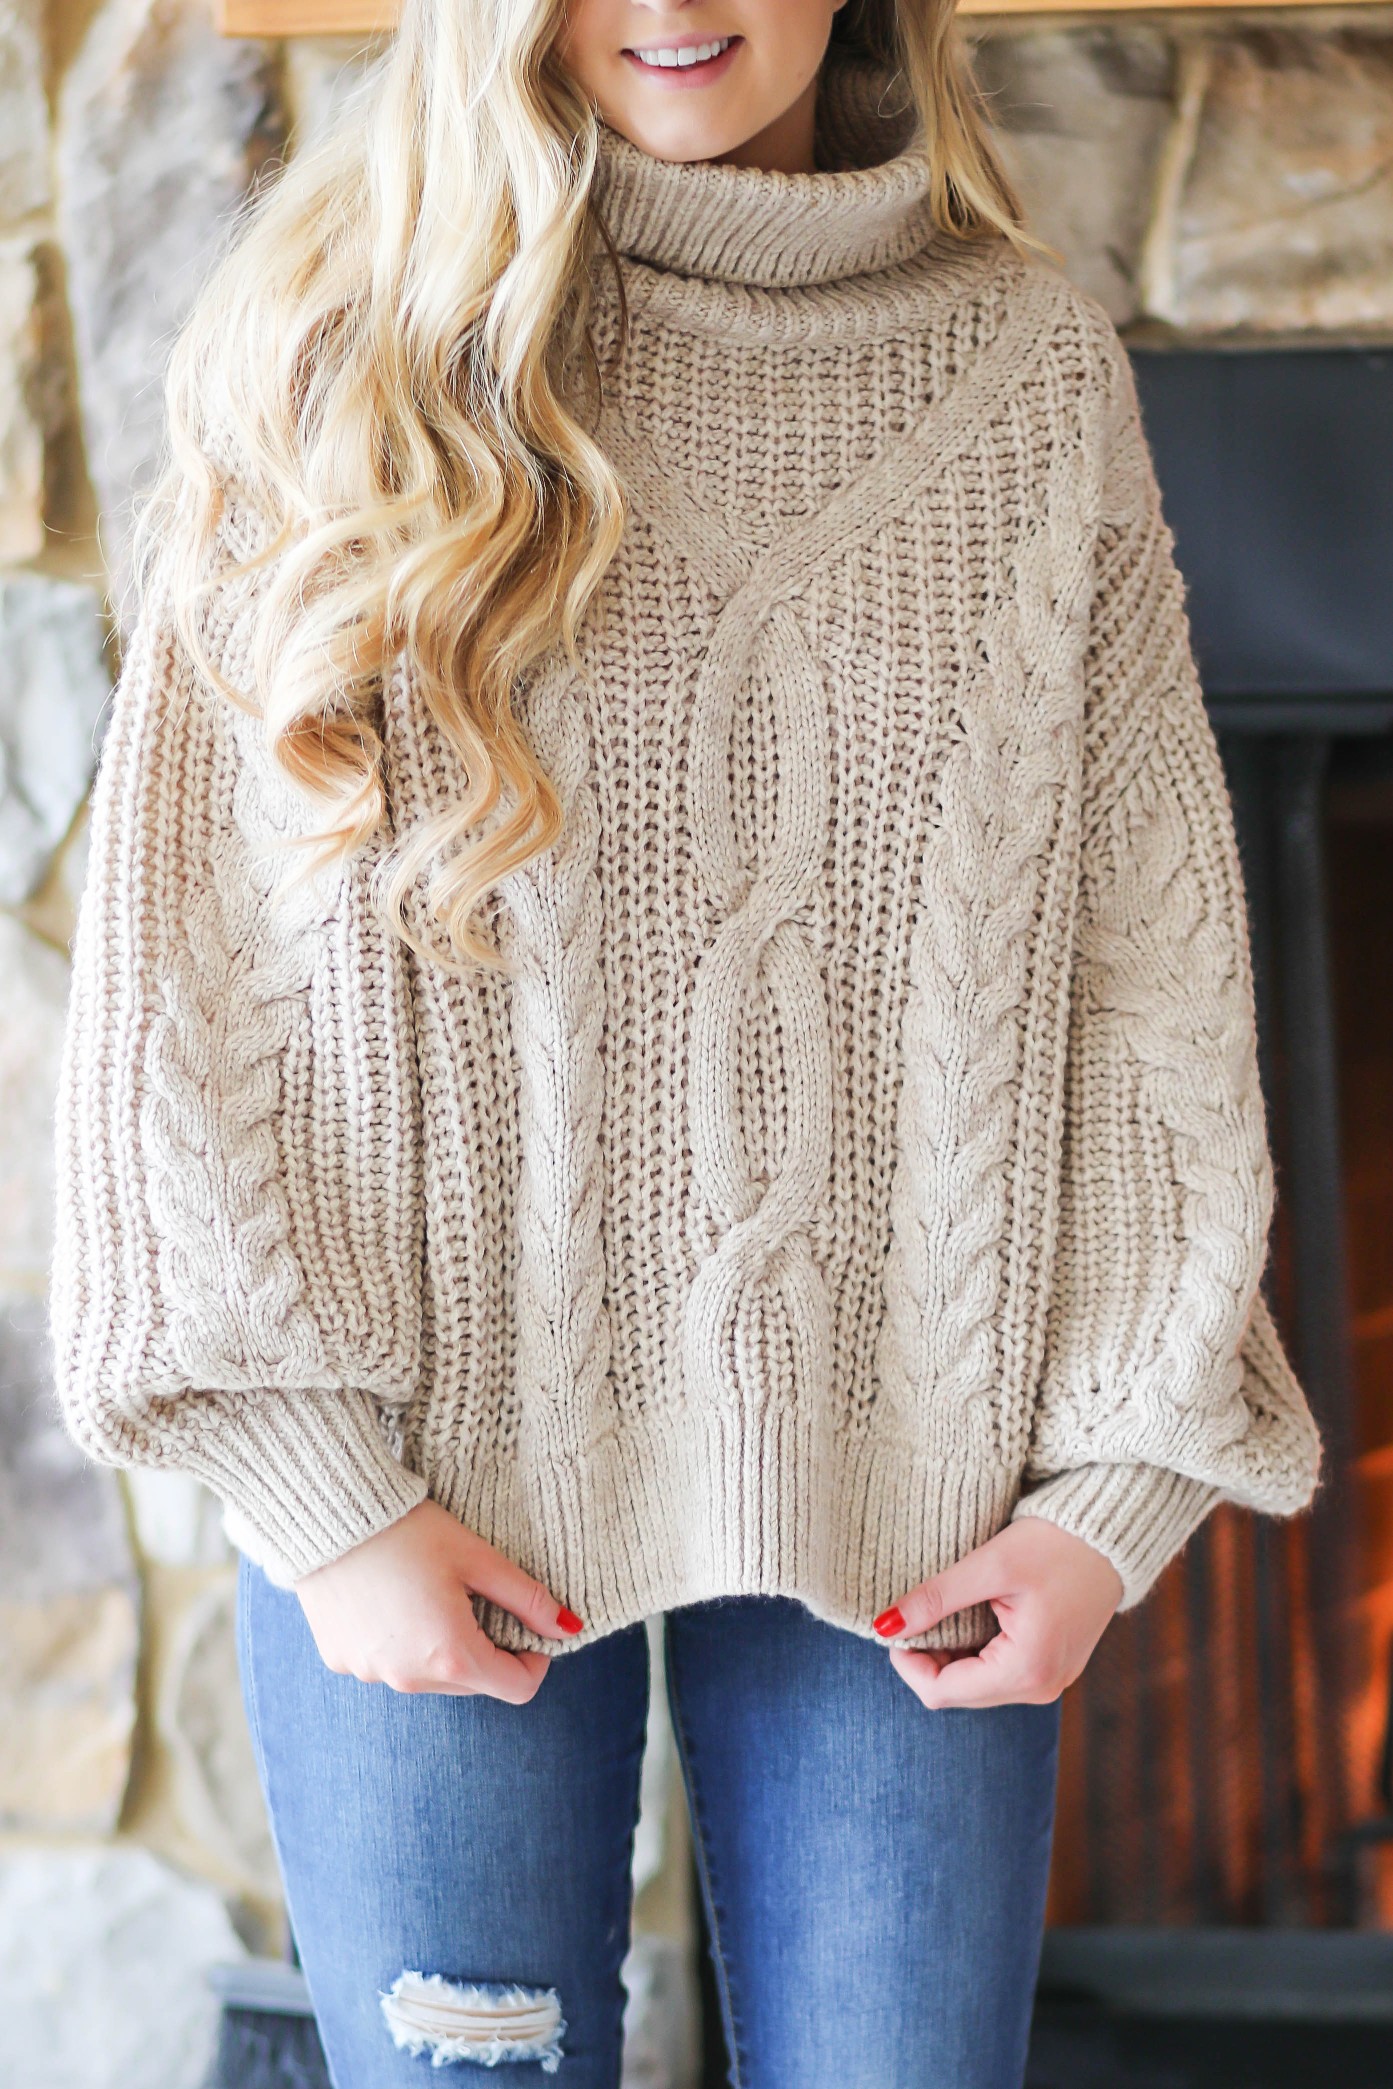 Cozy cable knit sweater in front of stone fireplace! This winter cable knit sweater is so cute and the fire looks so inviting! I paired it with my L.L. Bean duck Boots! Details on fashion blog daily dose of charm by lauren lindmark